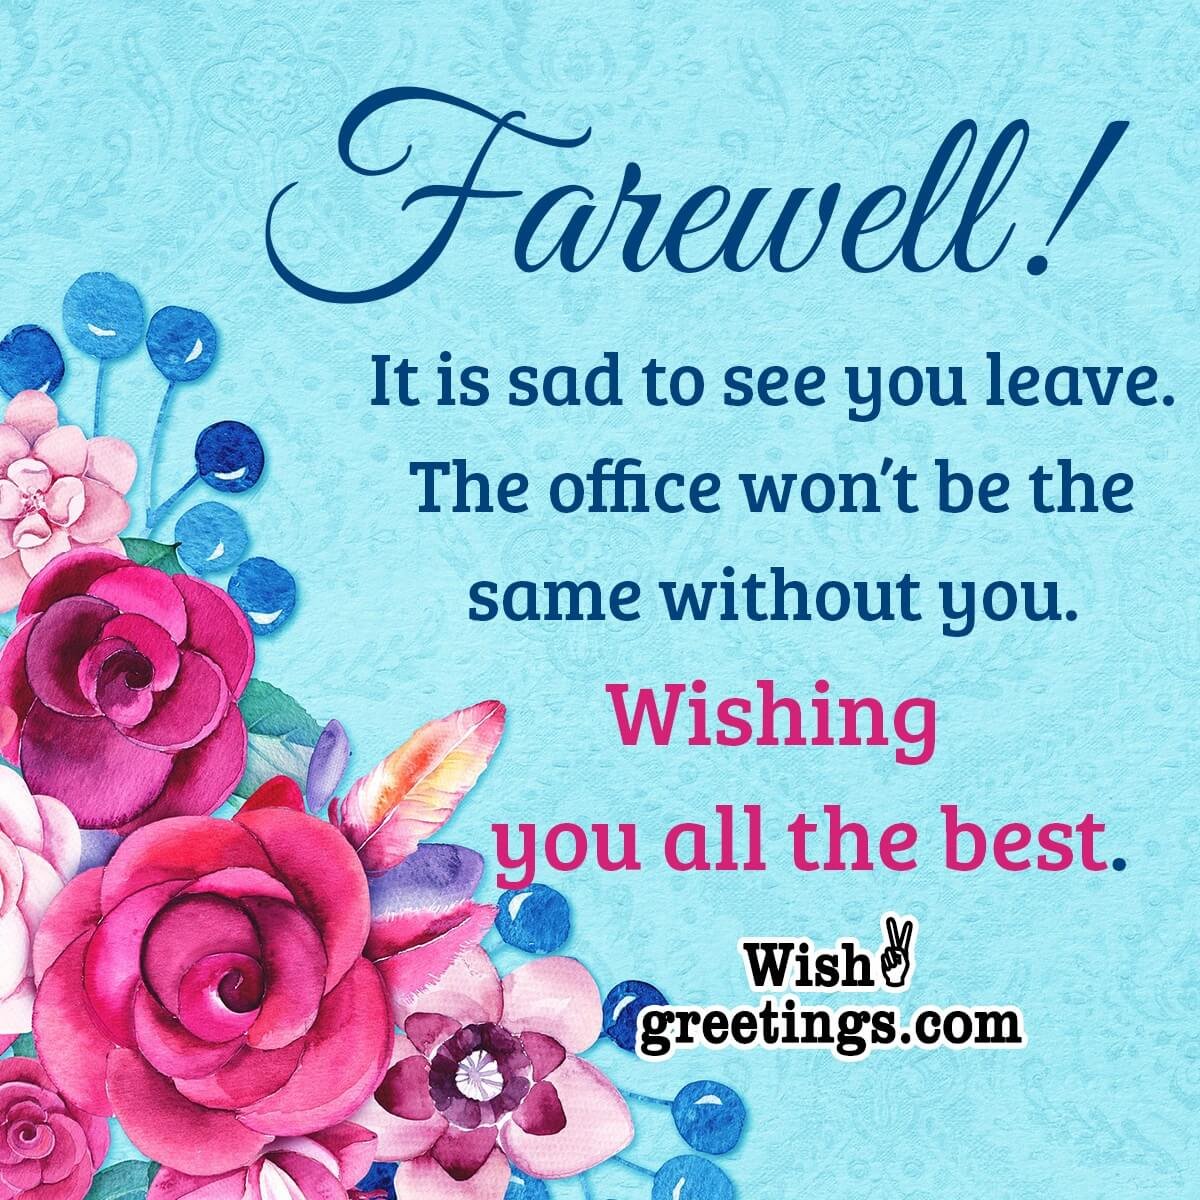 farewell-messages-for-colleague-wish-greetings